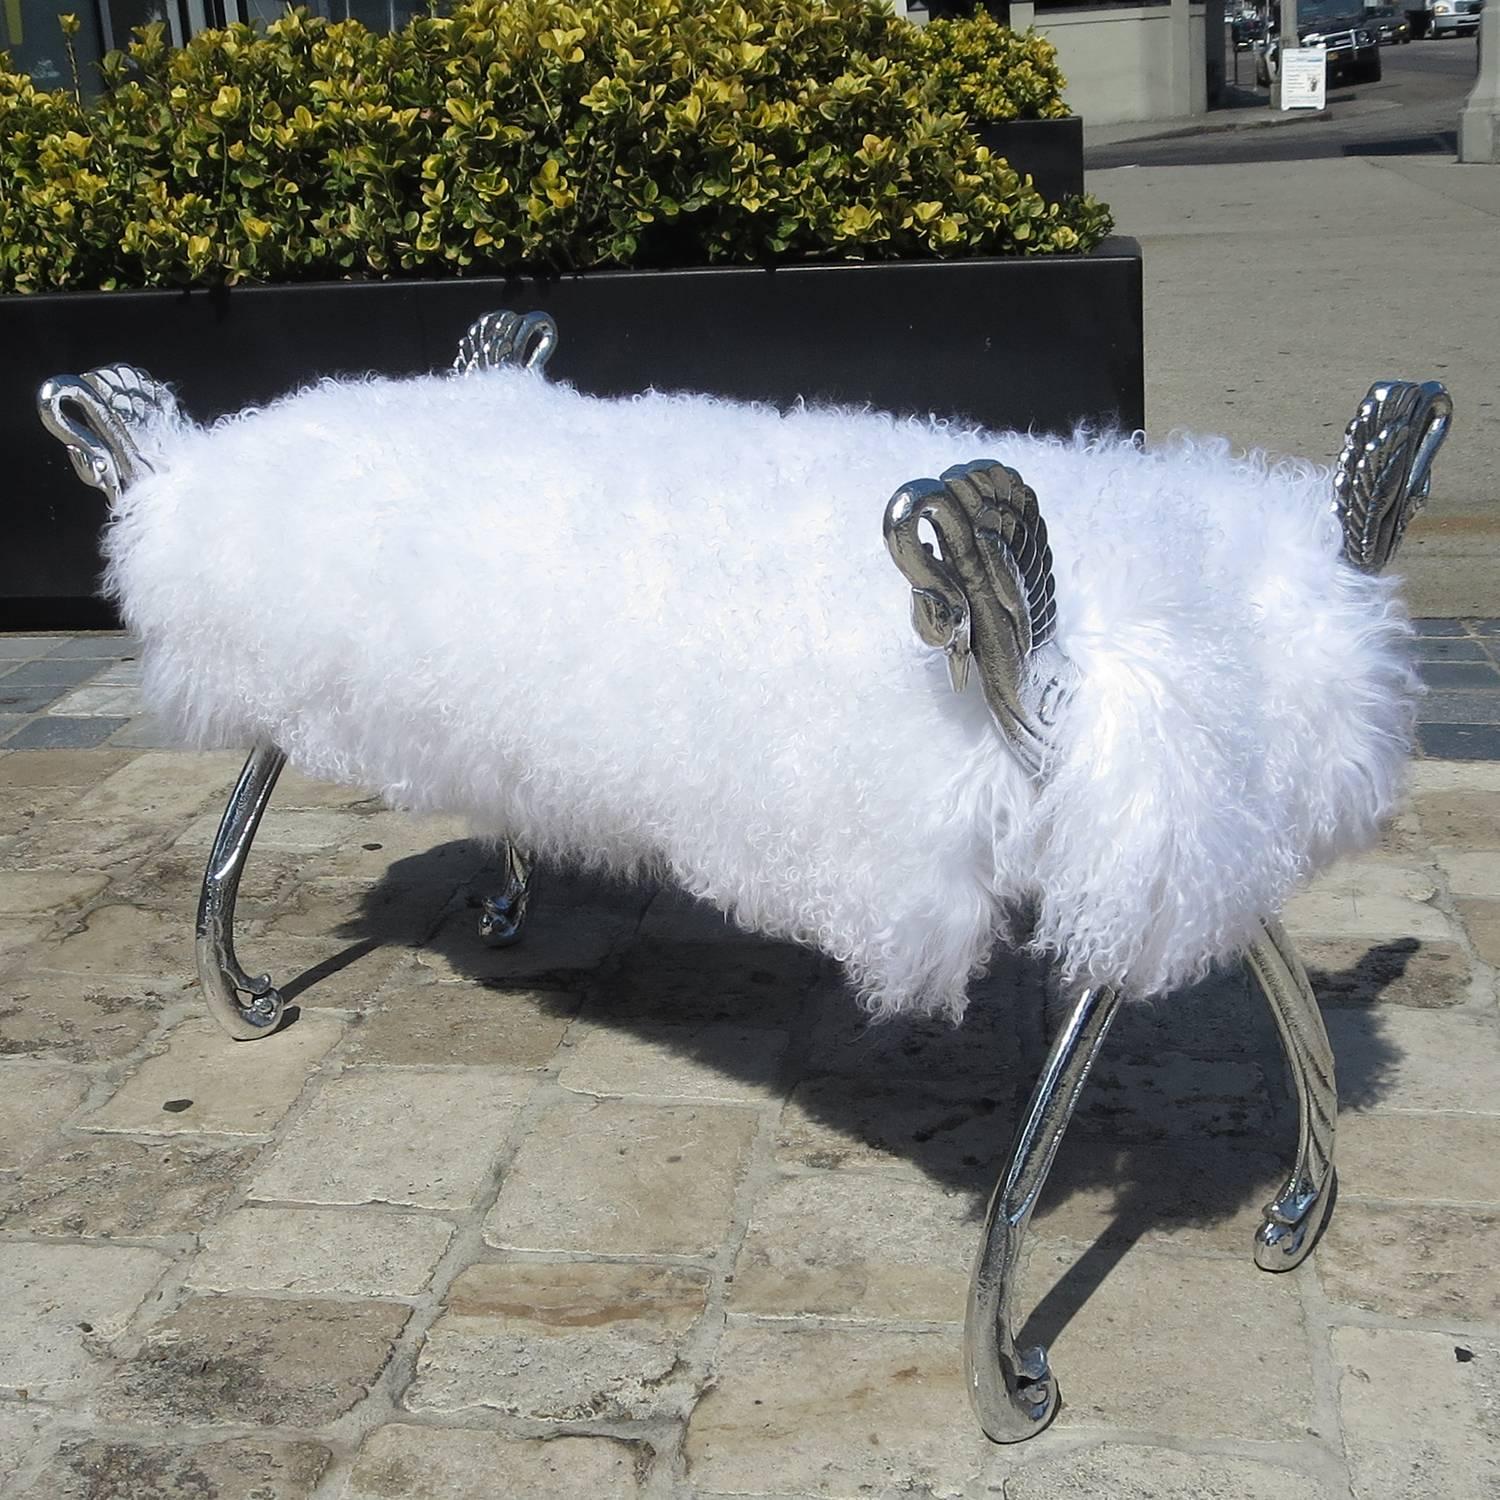 Fantasy furniture at its' finest! We have polished the aluminum swan arms to a high sheen, and reupholstered the bench in a silky soft sheep fur. The finished bench should add the right touch of glamour to any room!